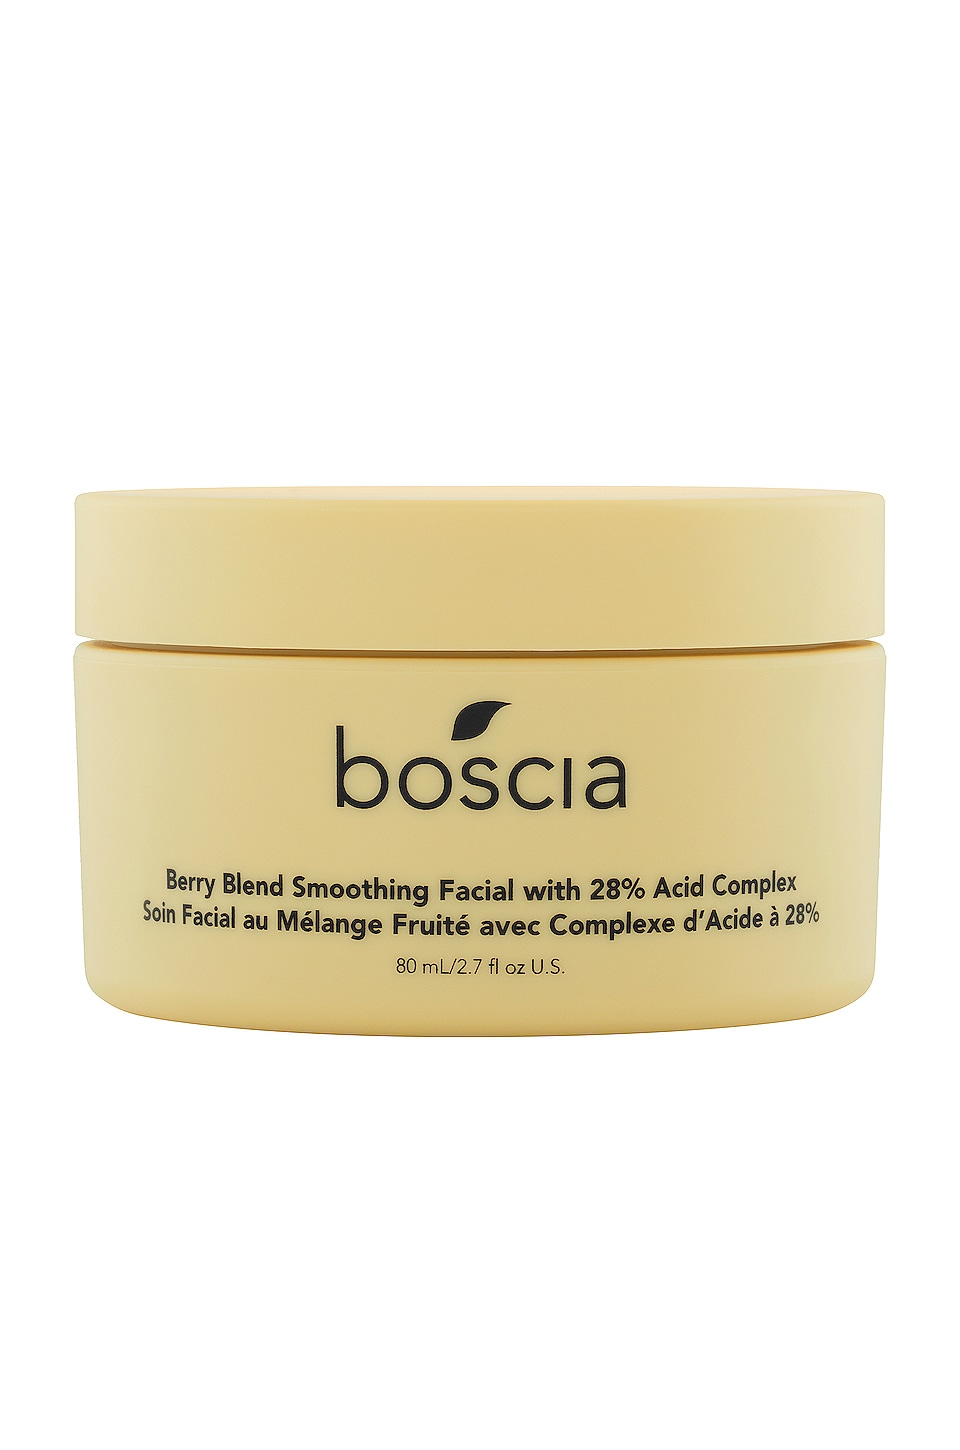 BOSCIA BERRY BLEND SMOOTHING FACIAL WITH 28% ACID COMPLEX,BOSC-WU55